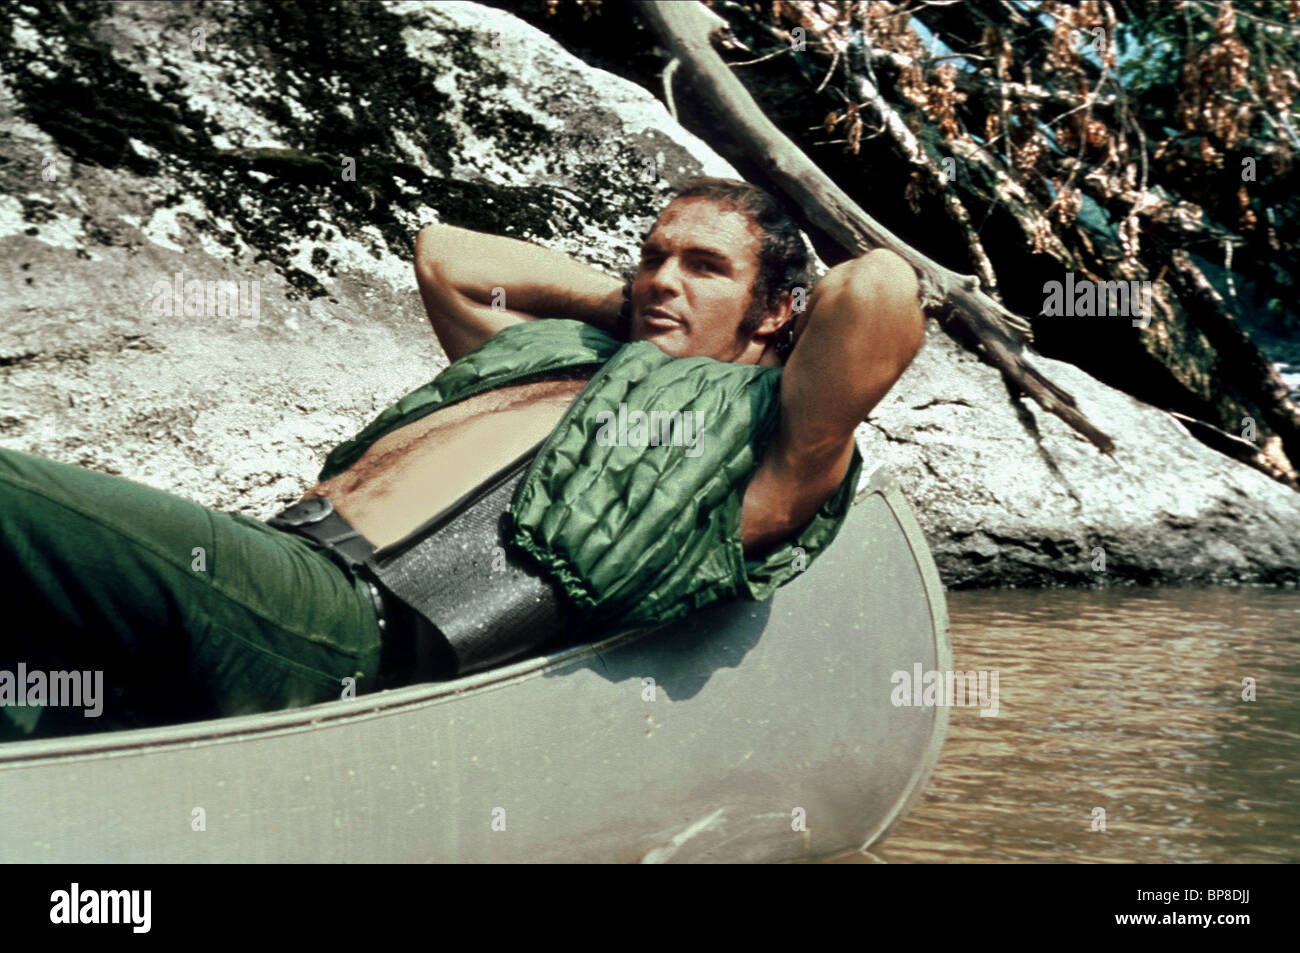 Burt Reynolds Deliverance High Resolution Stock Photography and Images -  Alamy